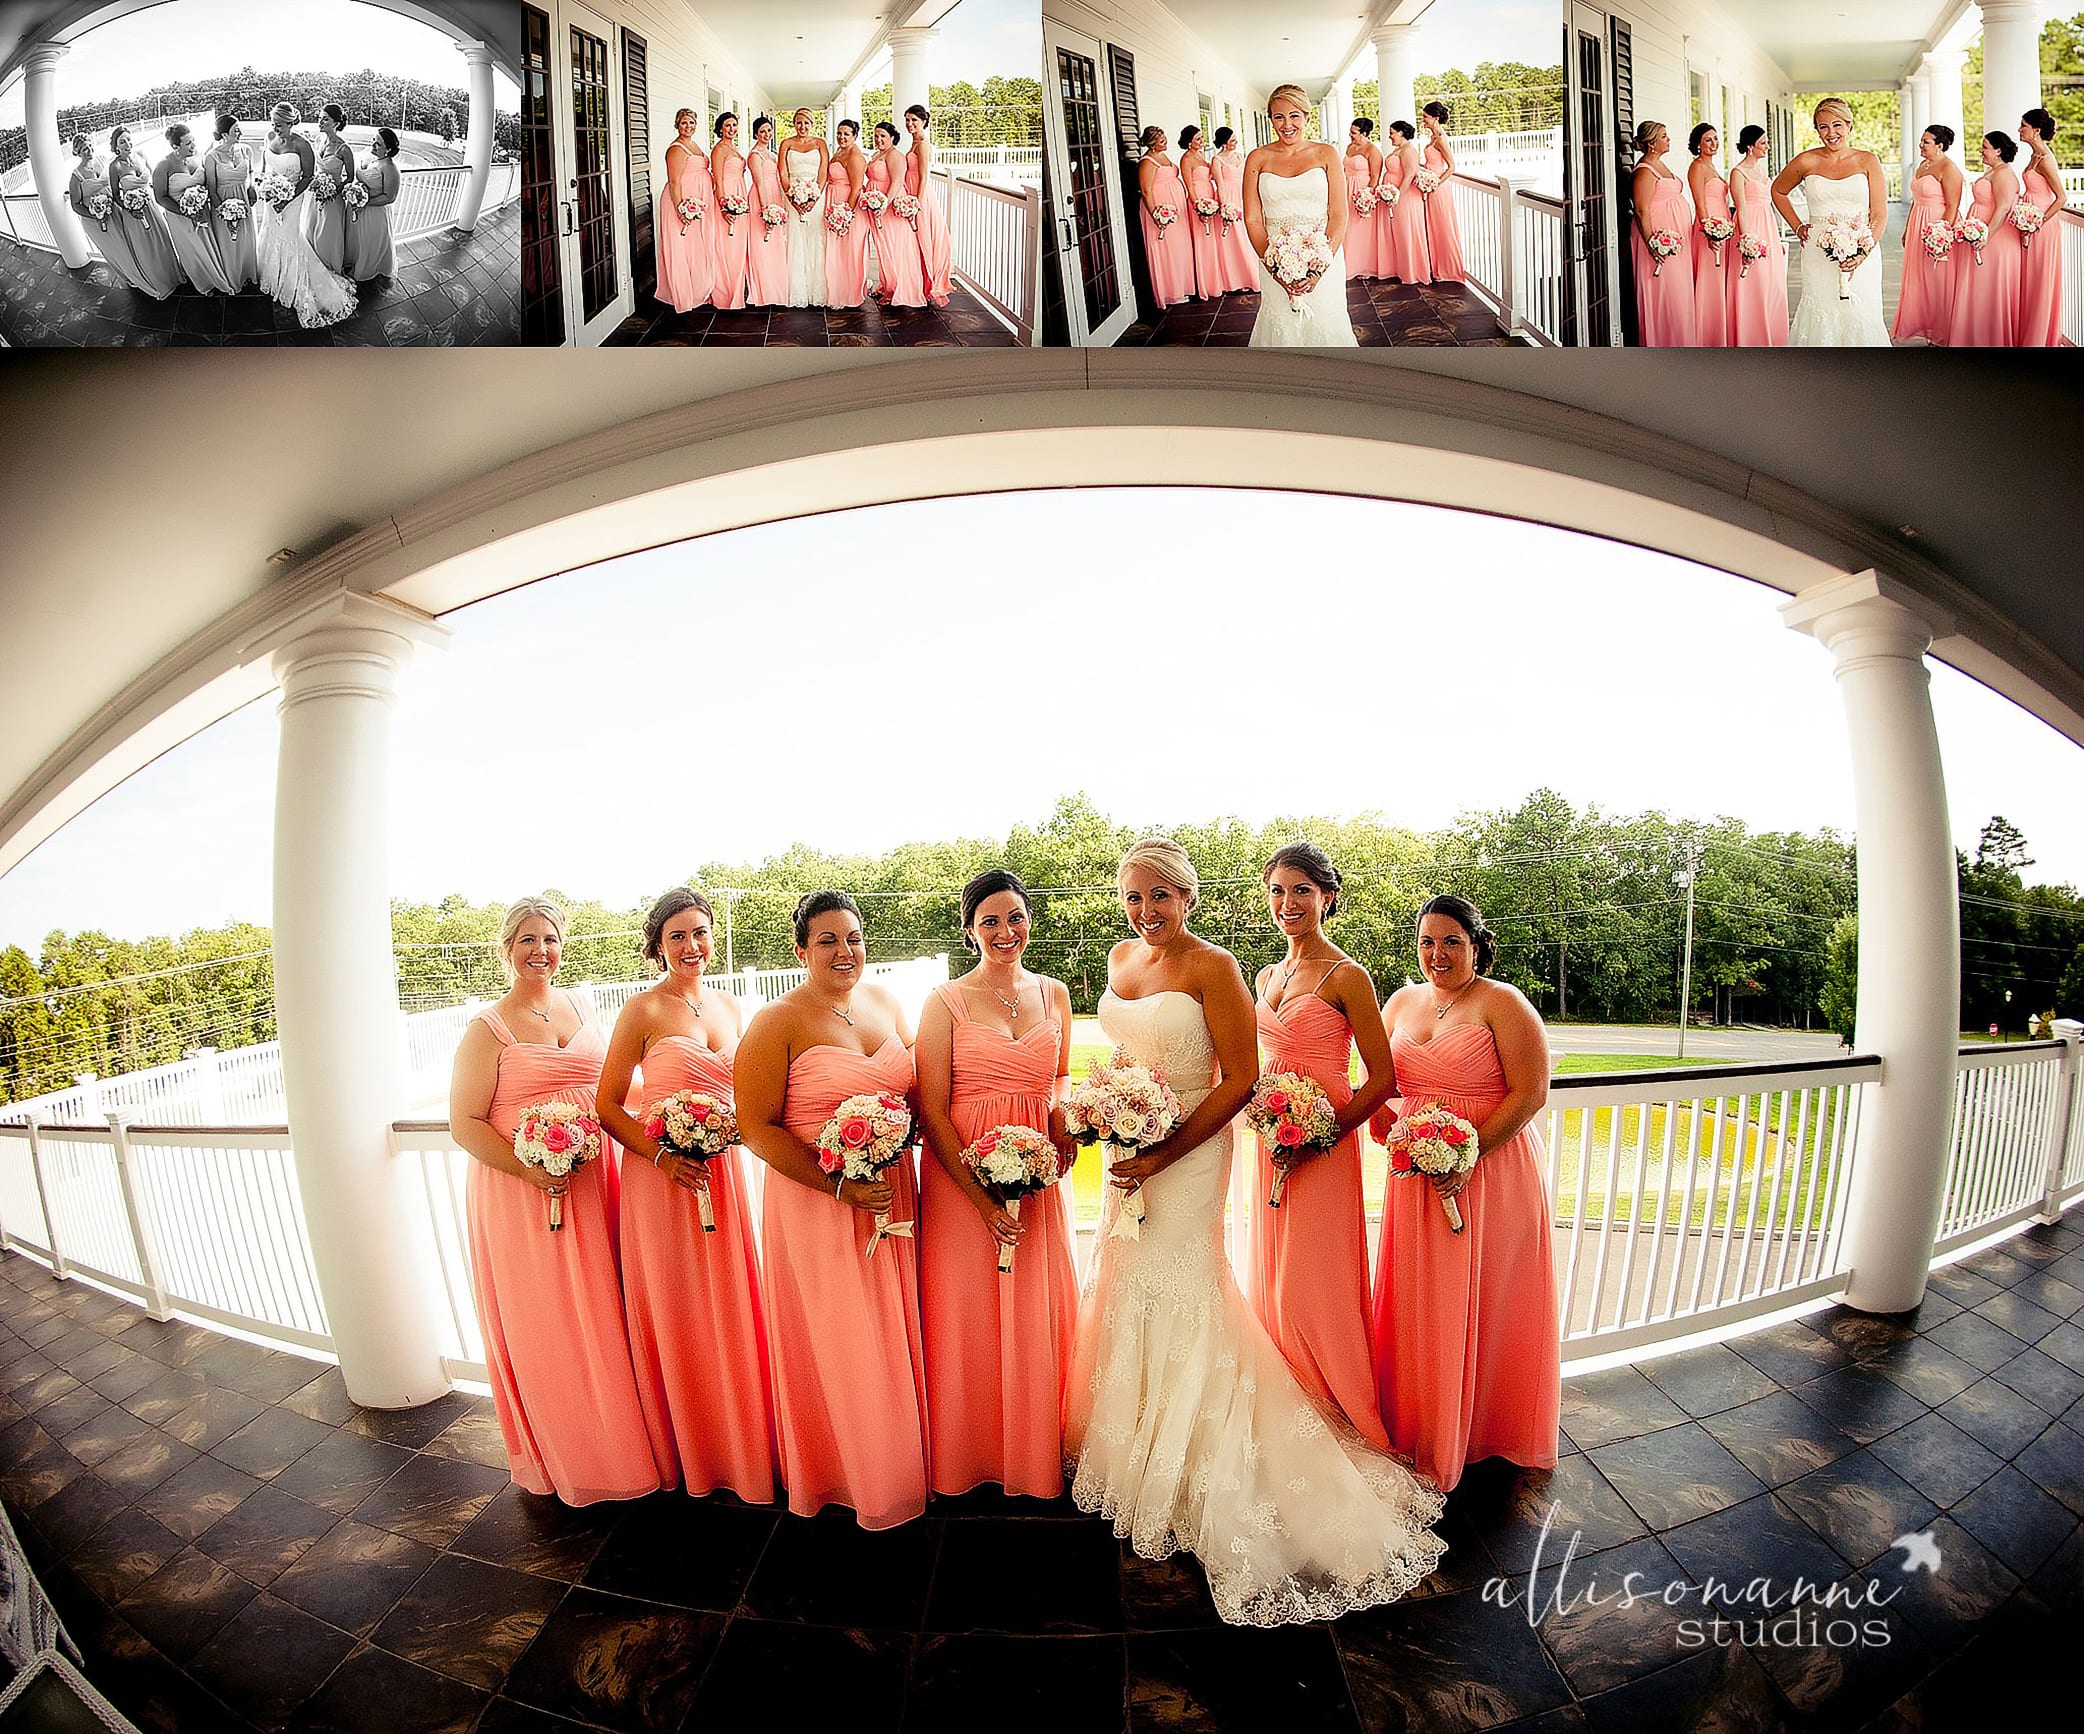 wedding, Murphy Farms, Farmer, Chevy Trucks, The Carriage House, love, AllisonAnne Studios, Best Photographer in South Jersey, Hammonton, The Big Day, Pink Bridesmaid Dresses